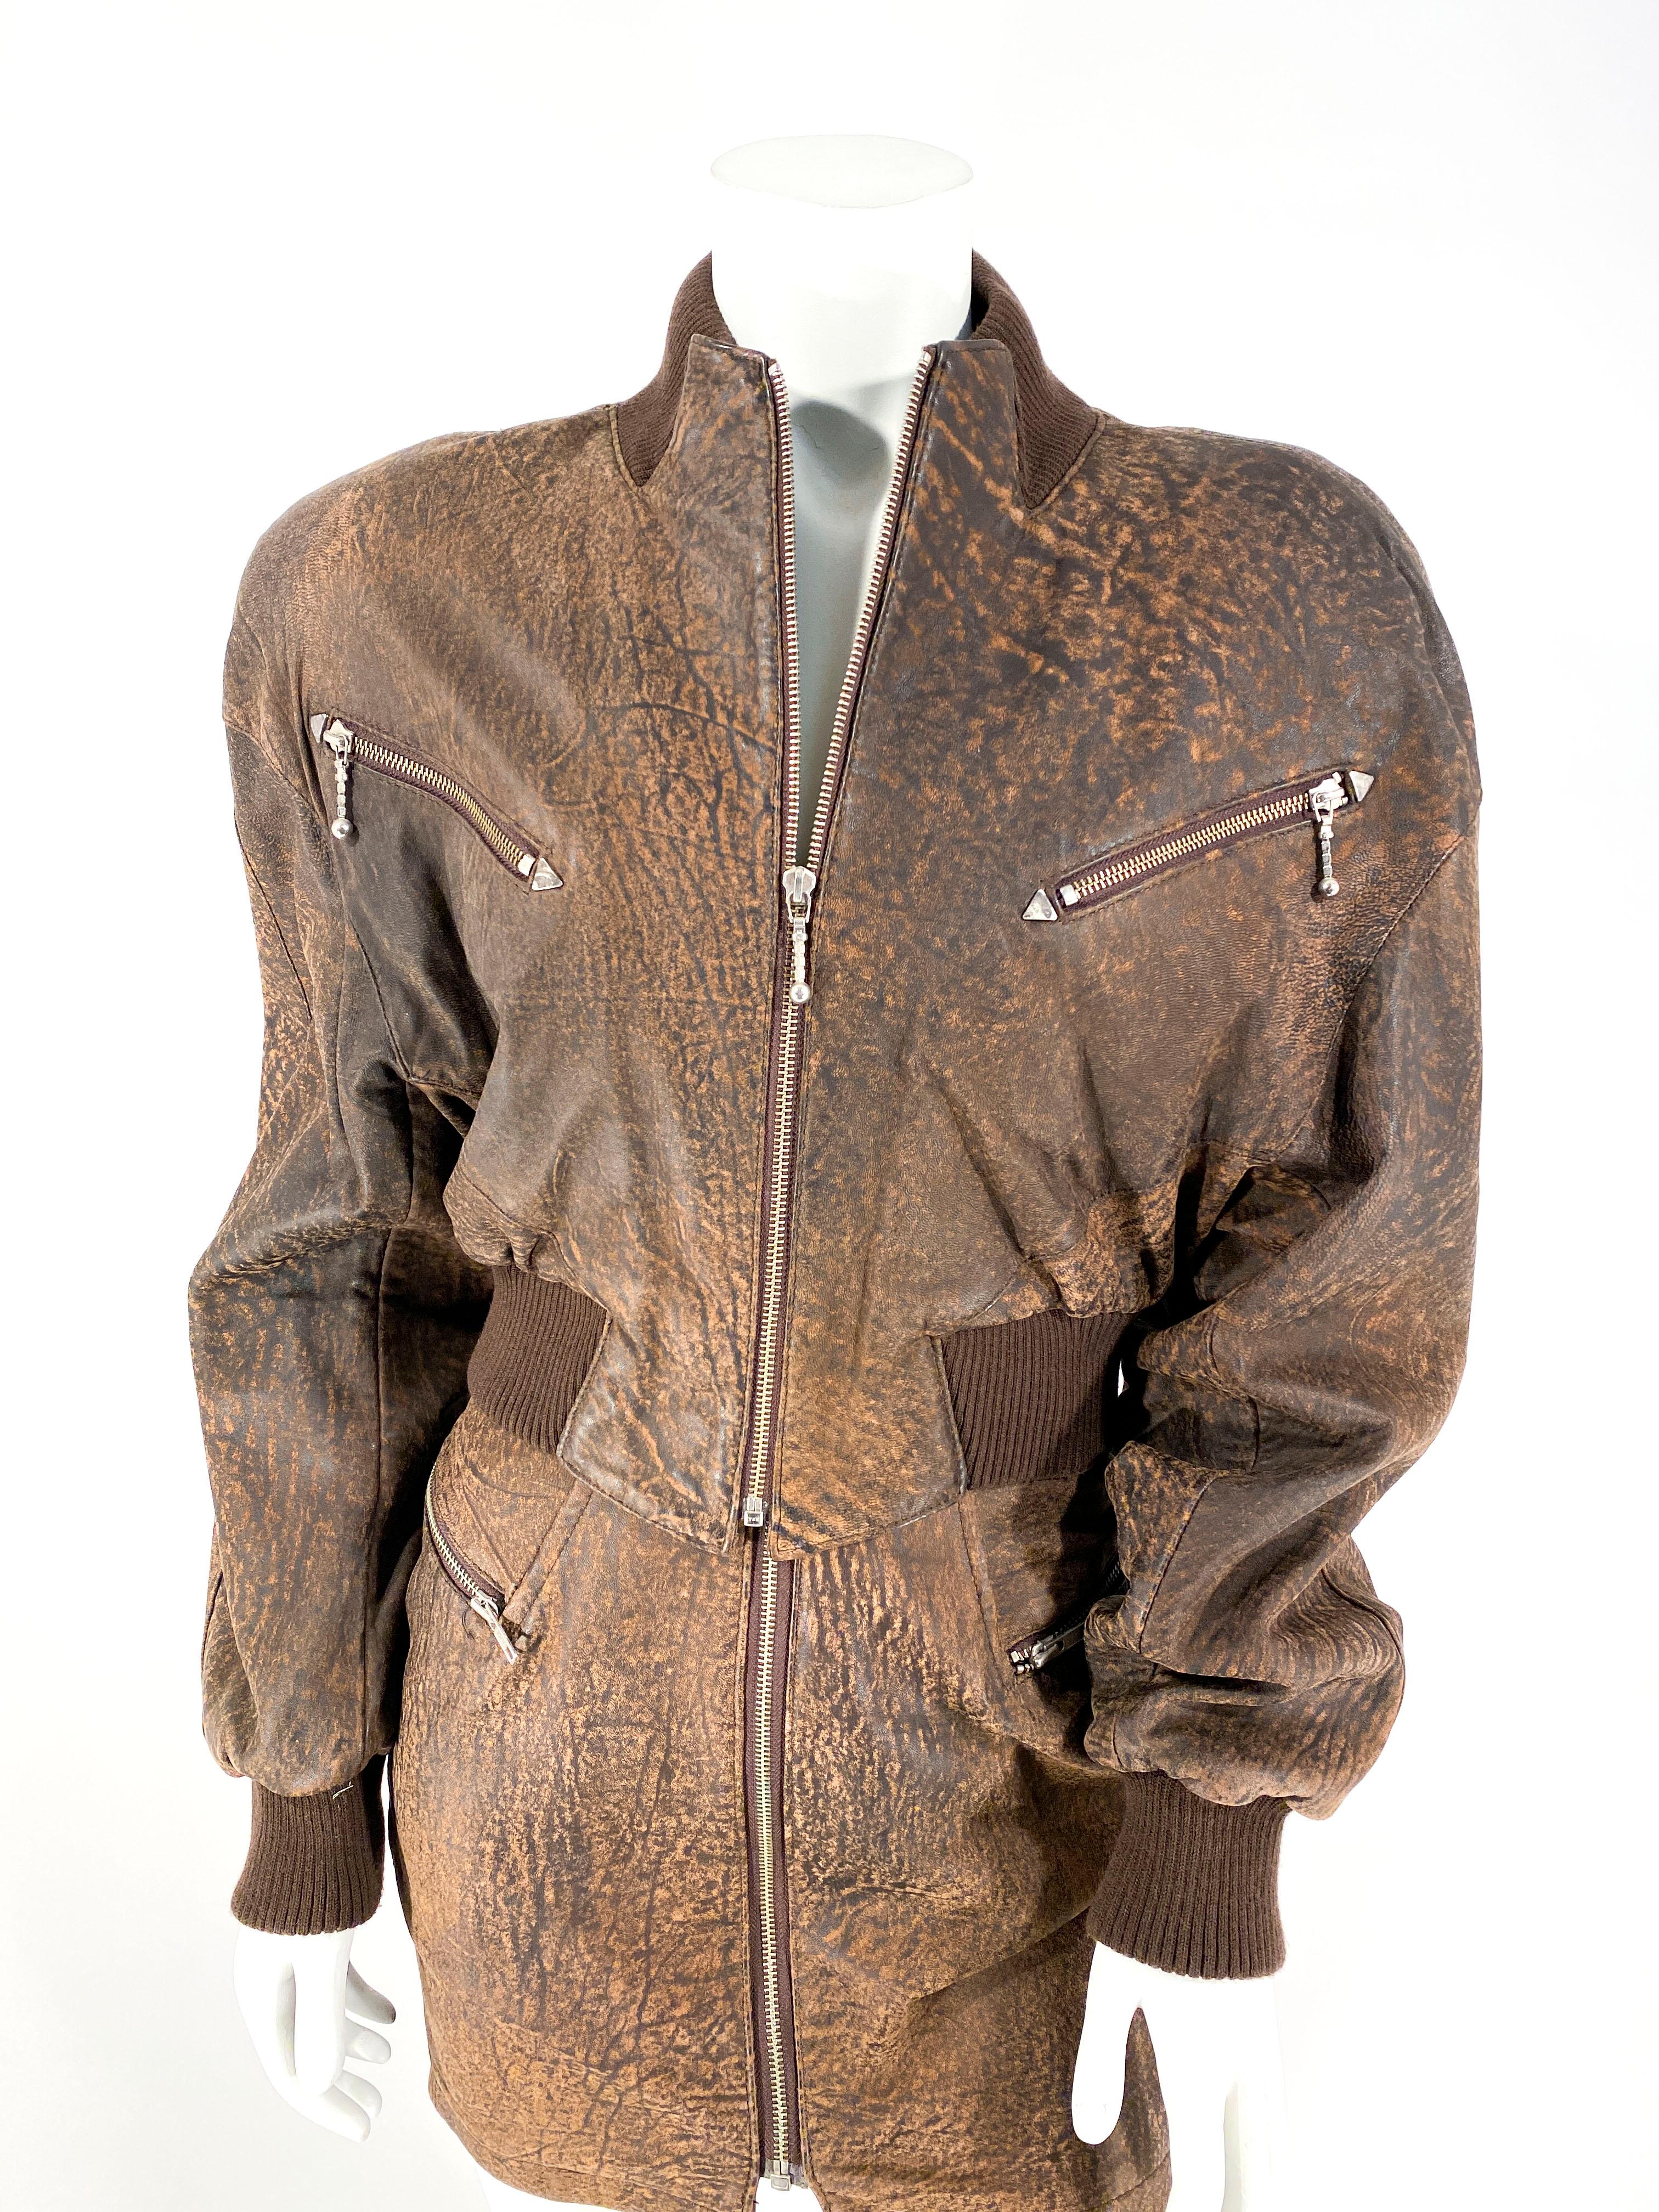 1980s North Beach Leather brown bomber jacket with zip closure and heavily padded shoulders, oversized/dramatic shape, and wide ribbing. The matching skirt has zip pocket and closure. The entire set is made of a soft brown leather with a distressed